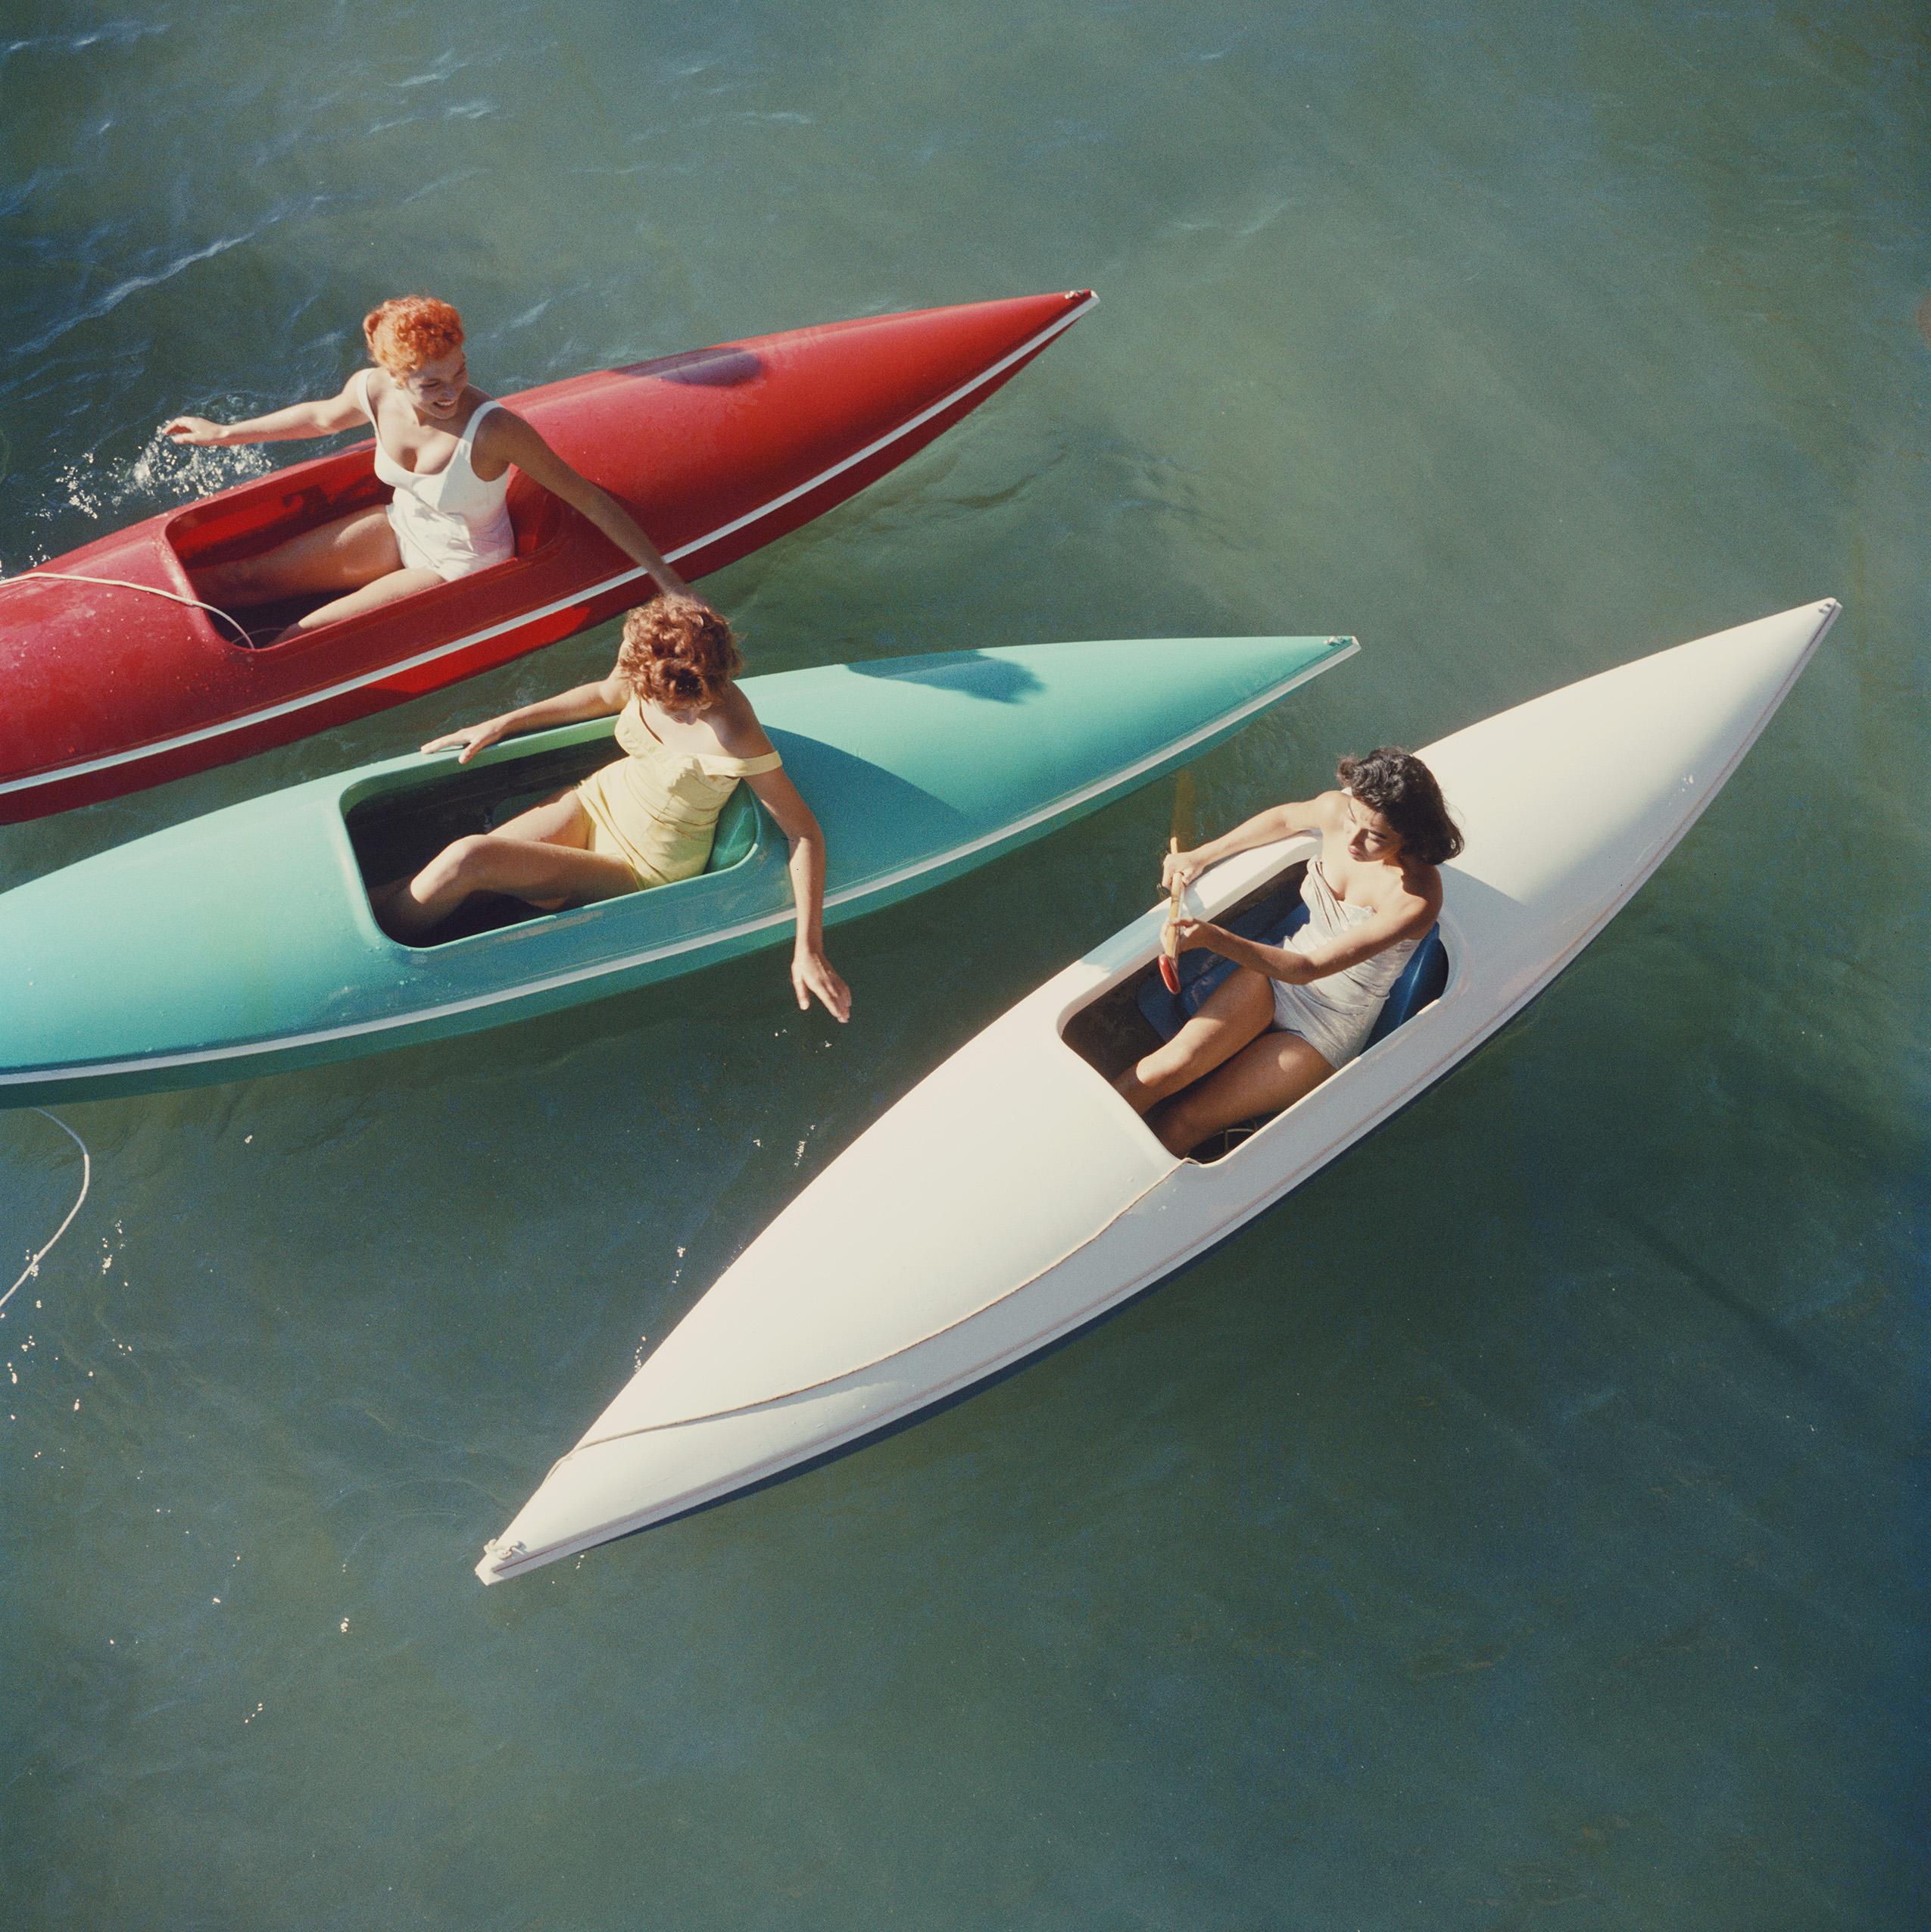 Slim Aarons
Lake Tahoe Trip
1959
C print
Estate stamped and hand numbered edition of 150 with certificate of authenticity from the estate. 

Young women canoeing at Zephyr Cove on the Nevada side of Lake Tahoe, USA, 1959. (Photo by Slim